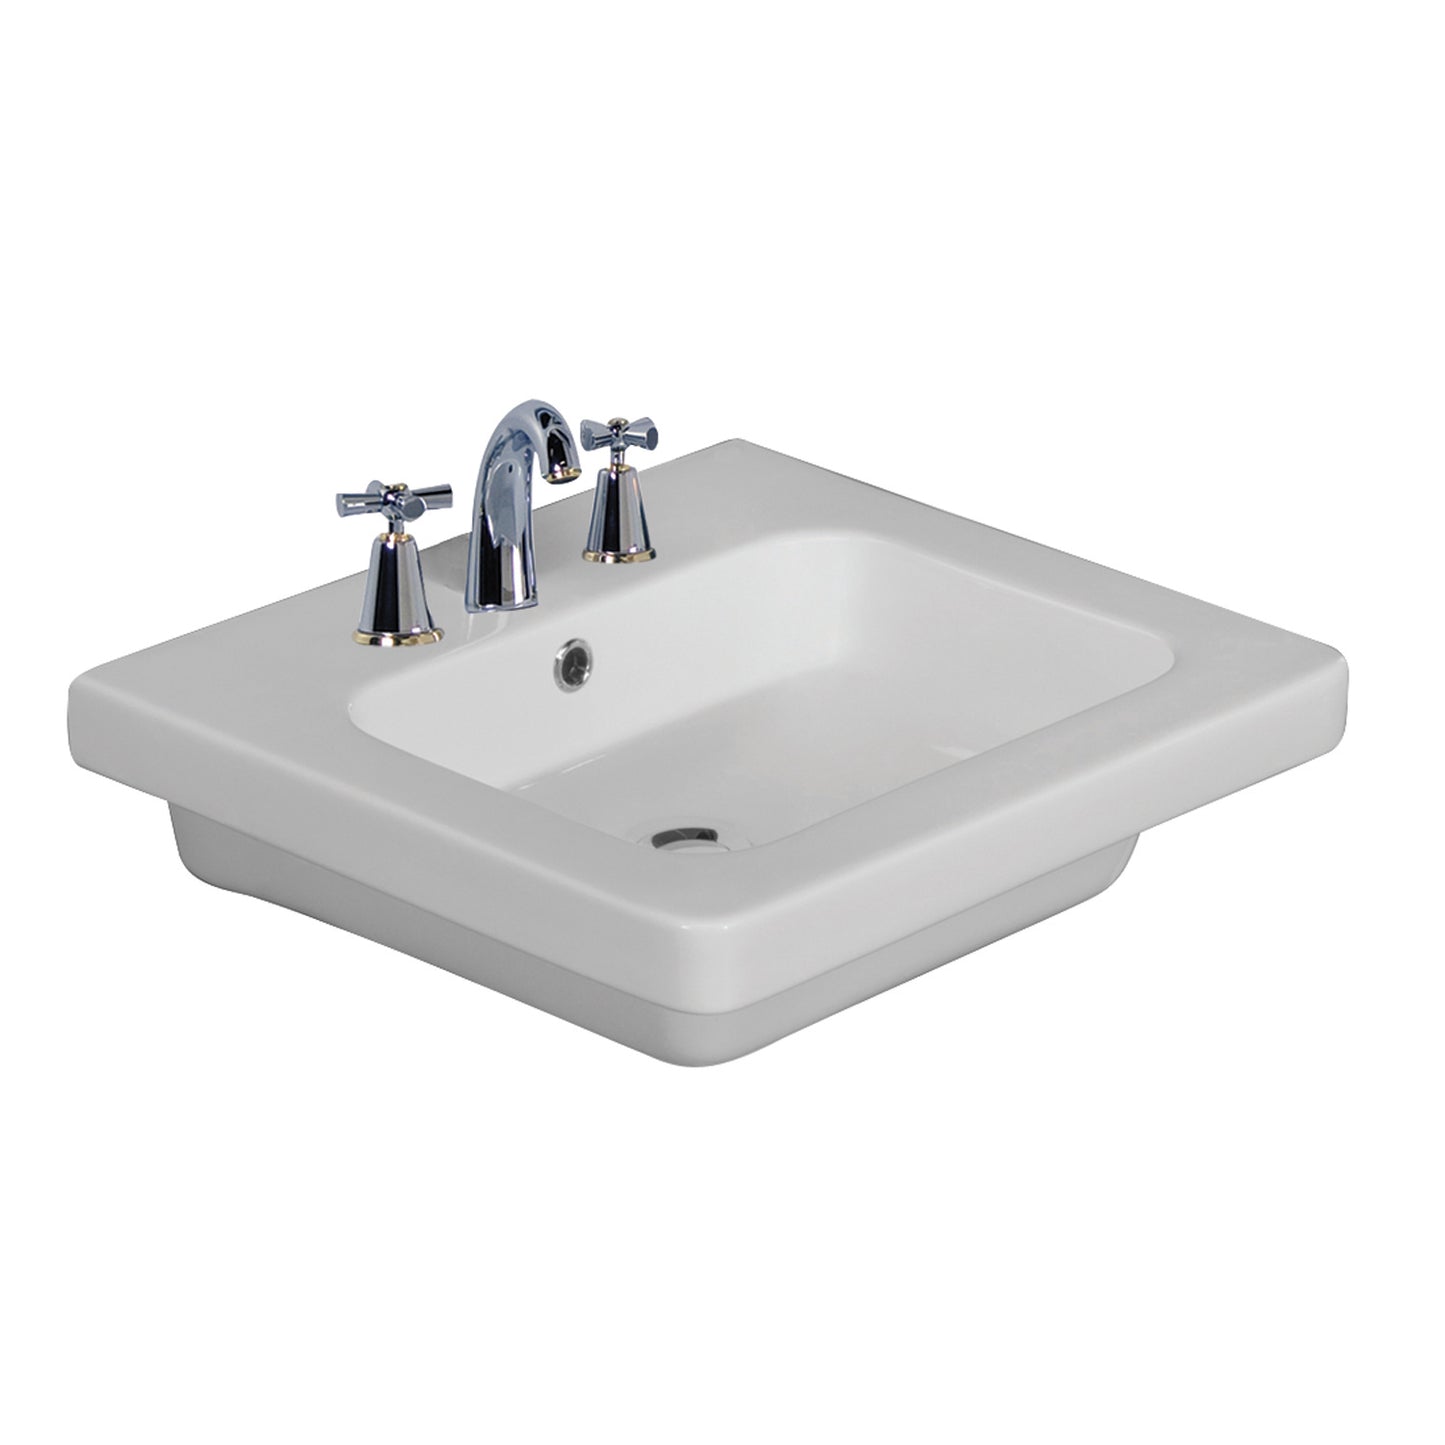 Resort 650 Wall Hung Bathroom Sink White For 8" Widespread